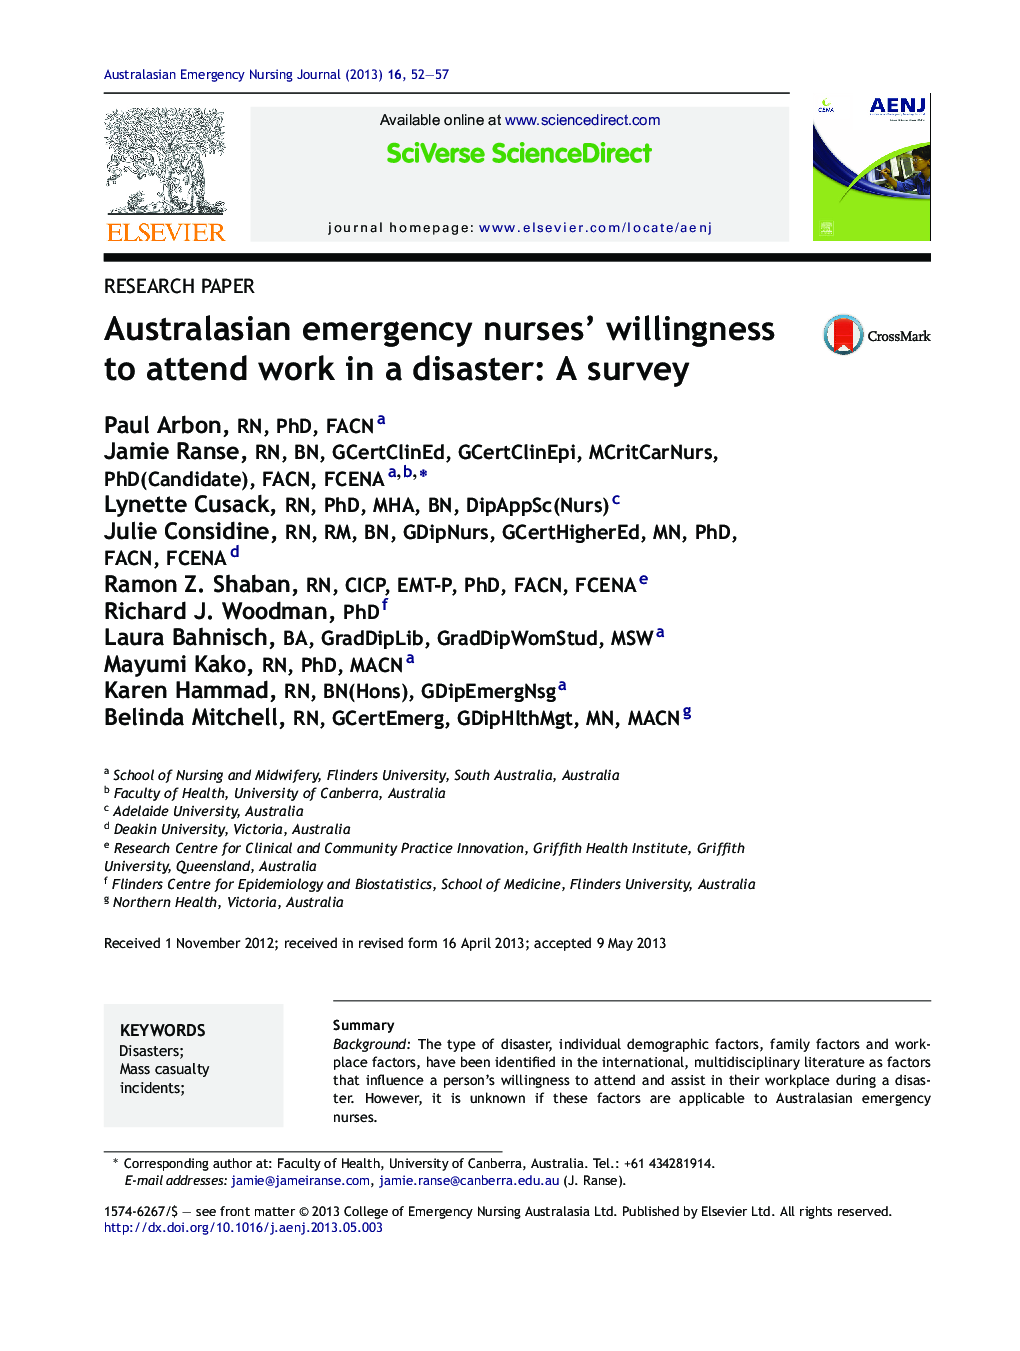 Australasian emergency nurses’ willingness to attend work in a disaster: A survey